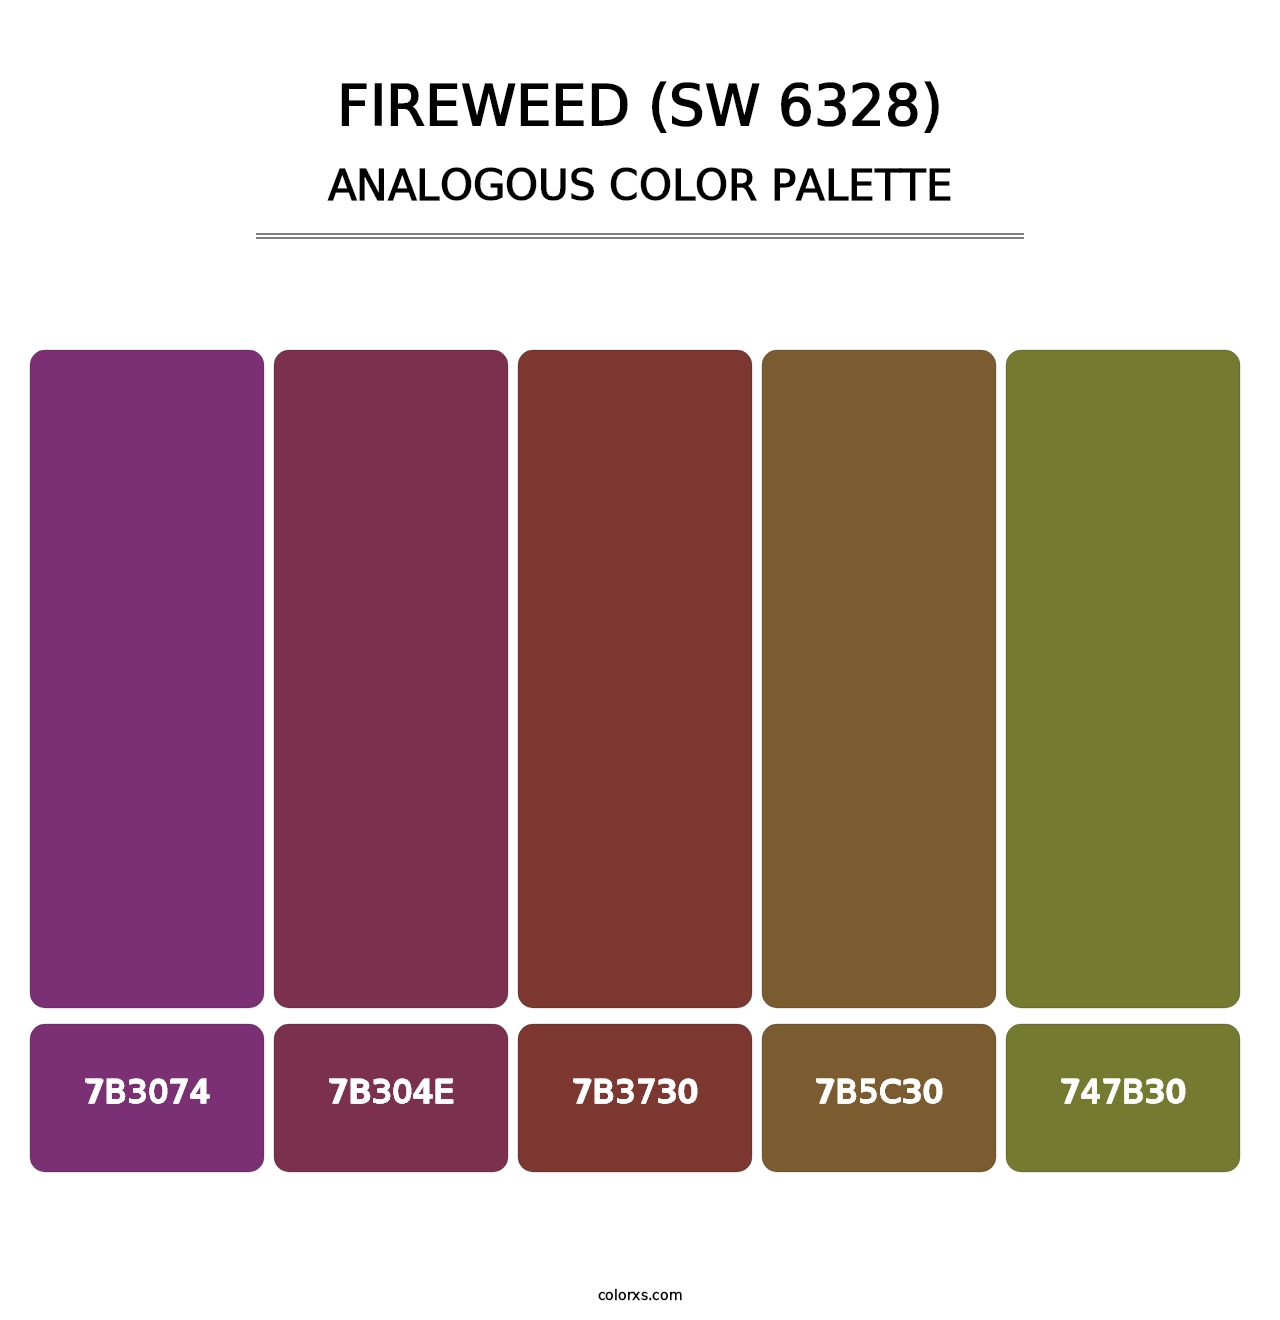 Fireweed (SW 6328) - Analogous Color Palette